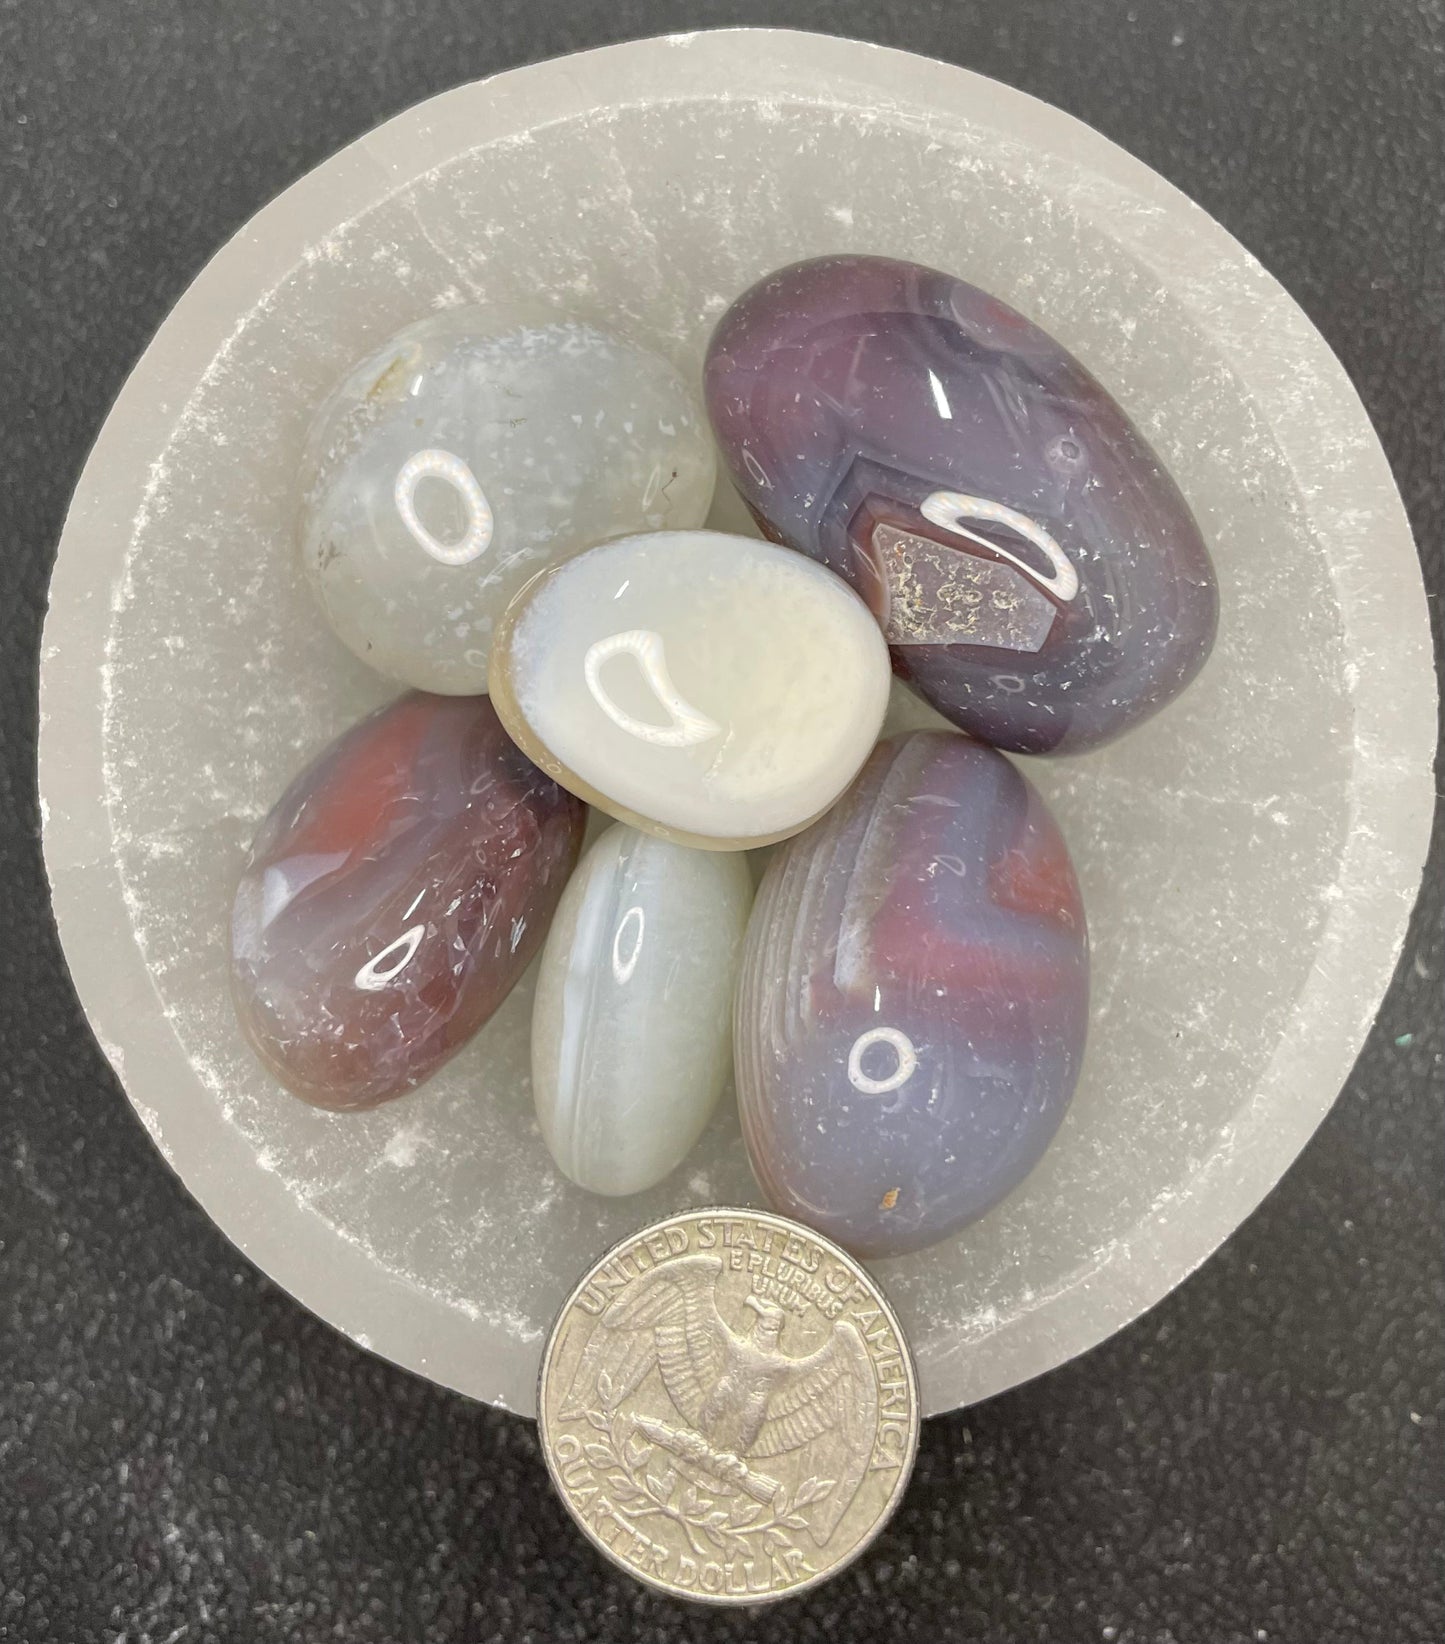 Plum Agate Tumbled Stone, 1 Pound Bag (Approx. 20-30 mm) WT-0107